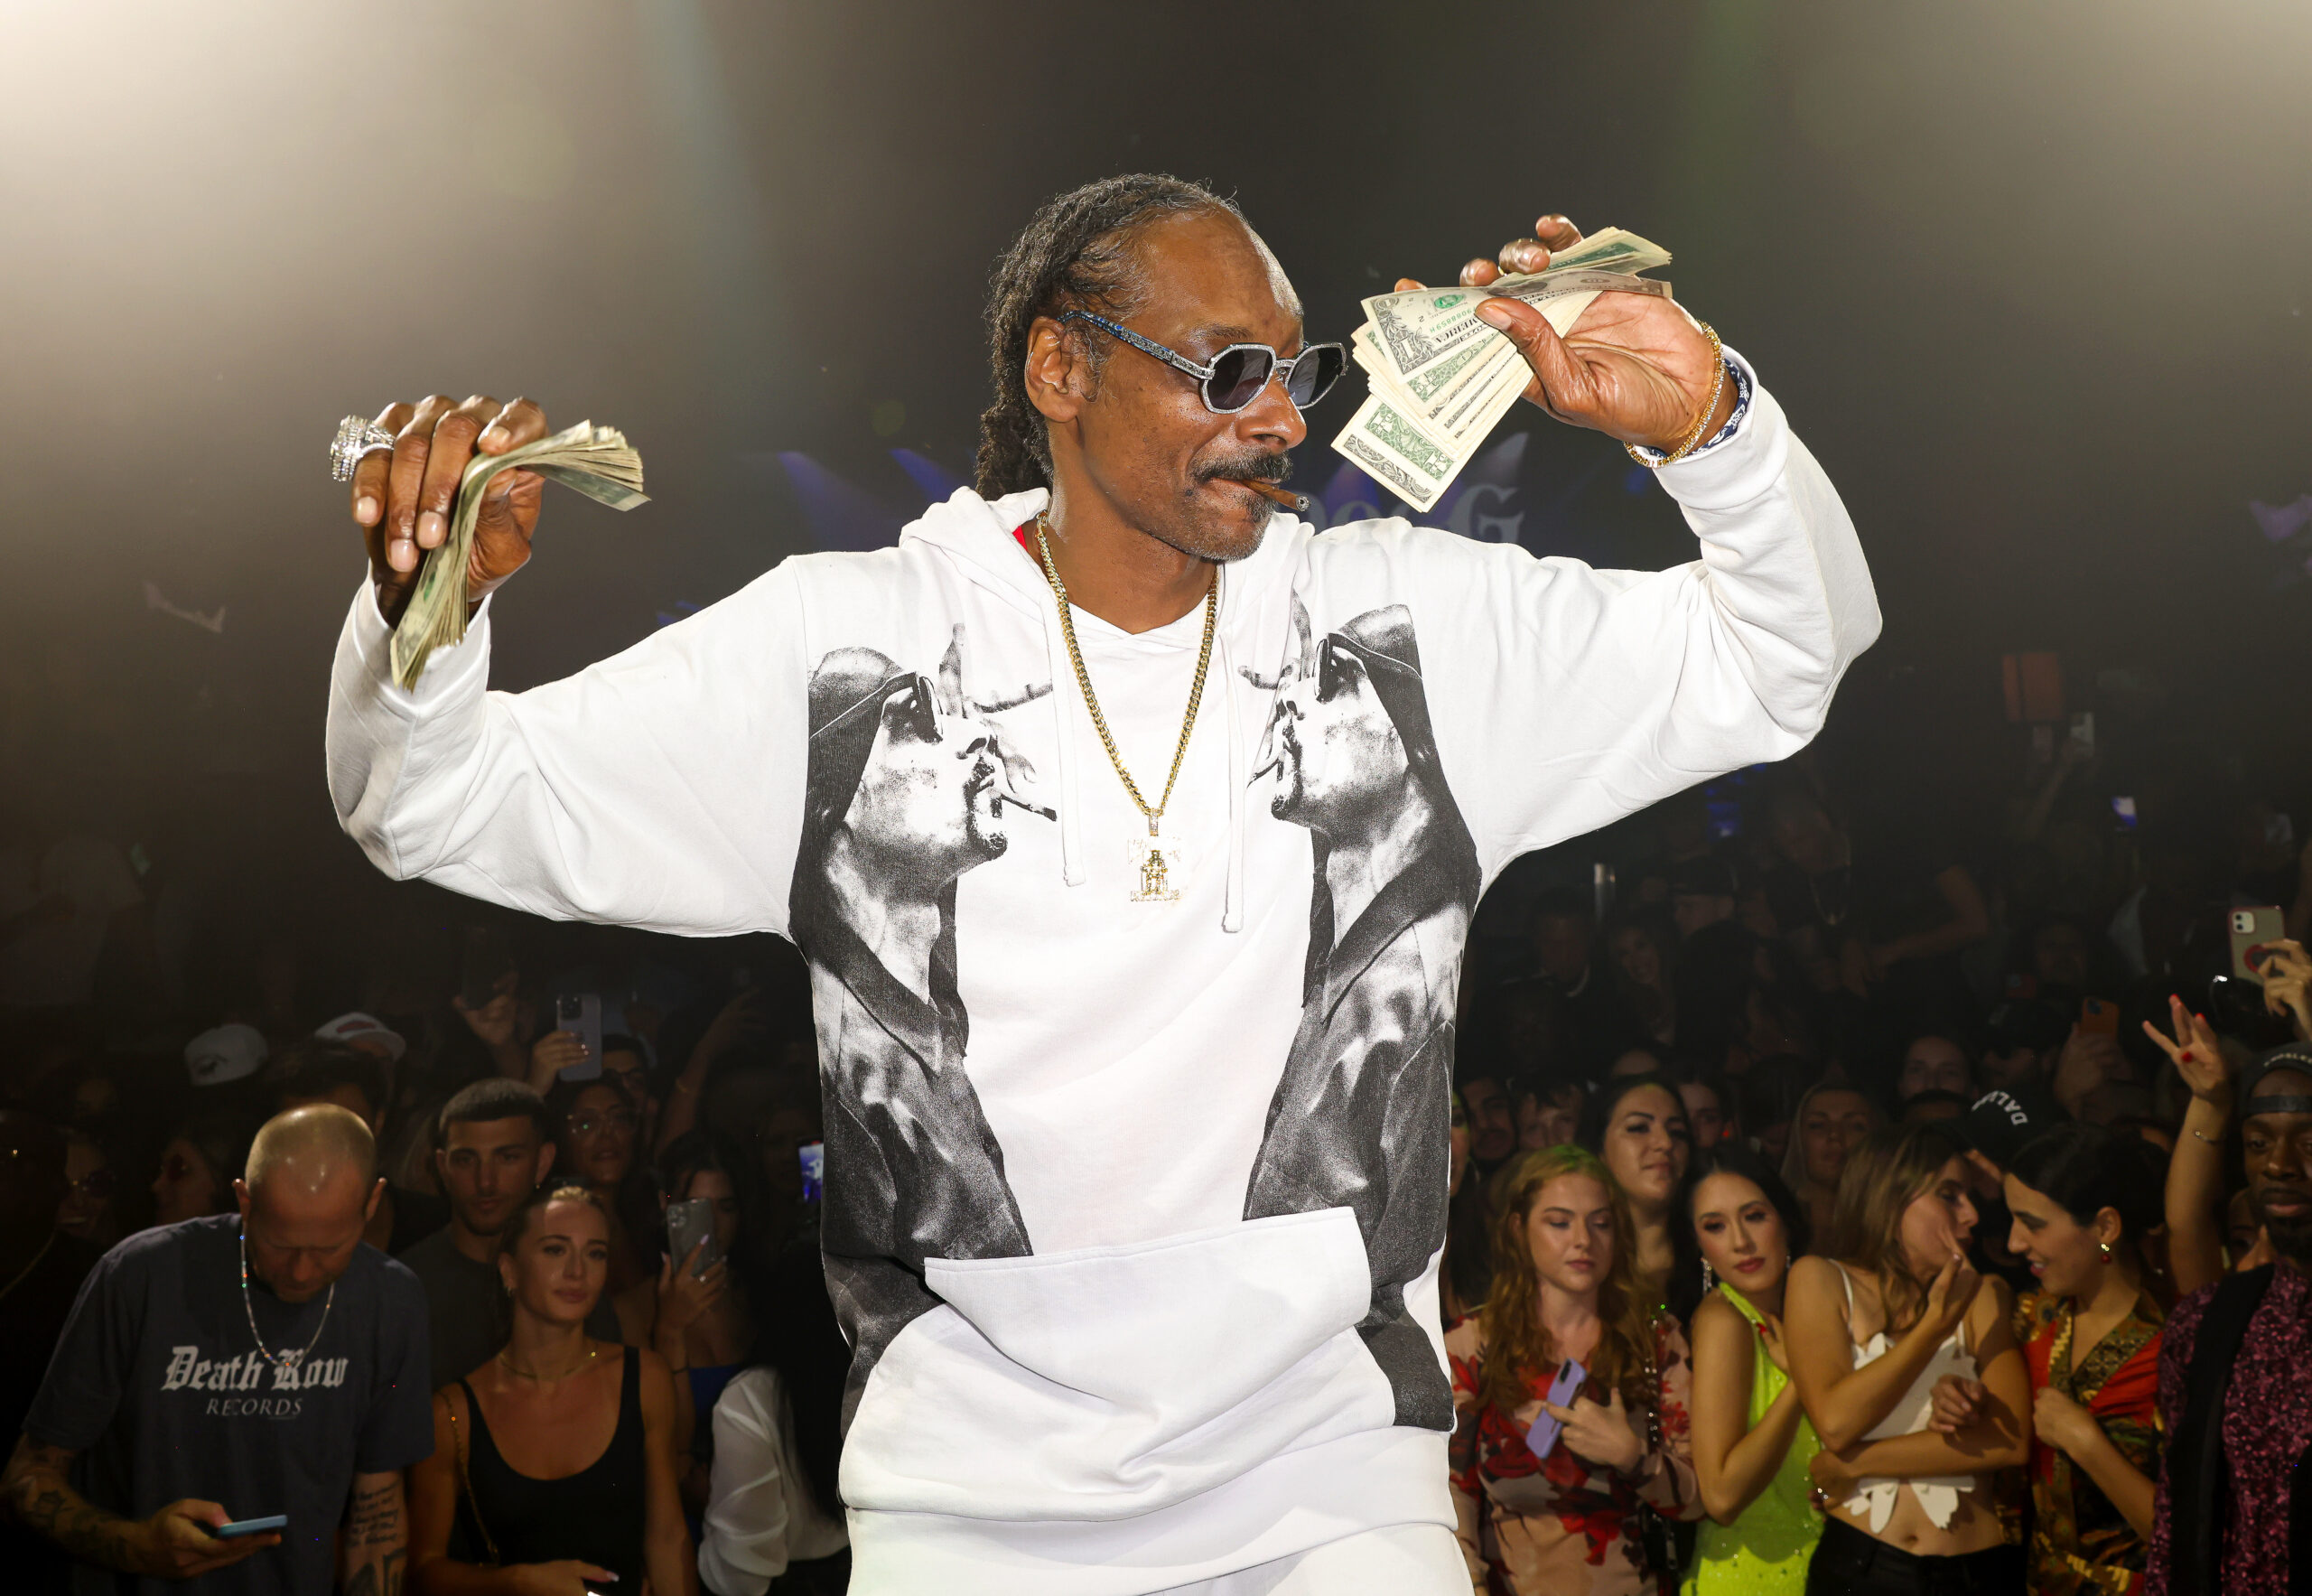 Snoop Dogg Reveals He “Really, Really,” Wants To Host A Kids Show